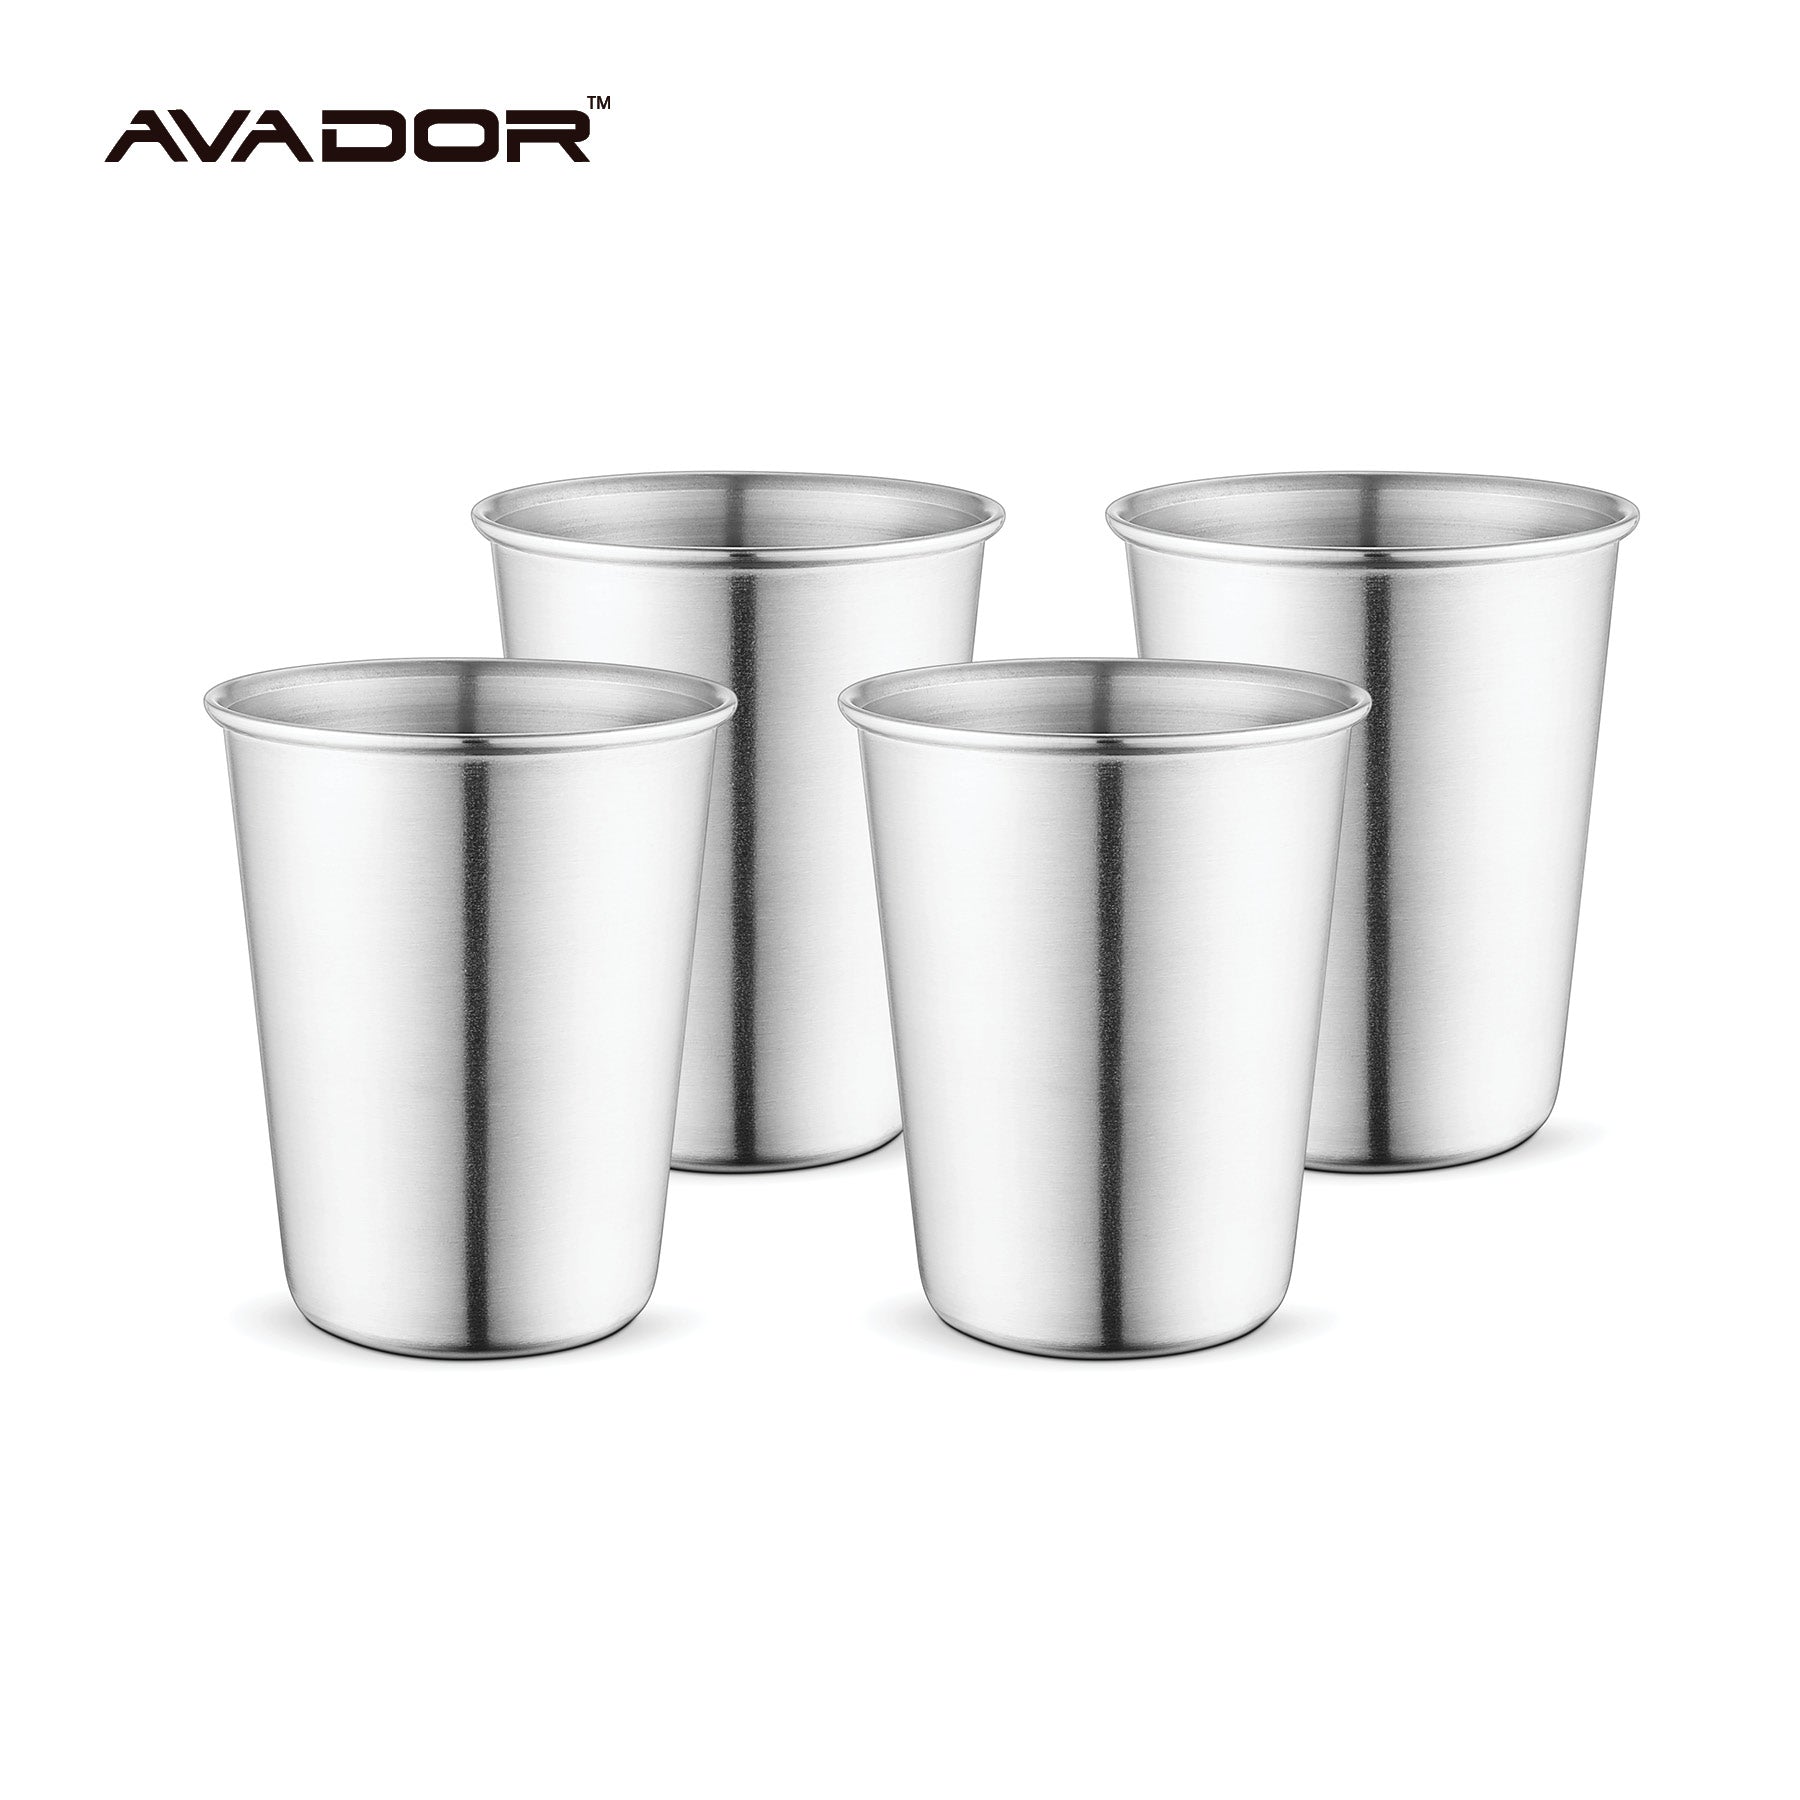 Stainless Steel Cup, 8 oz